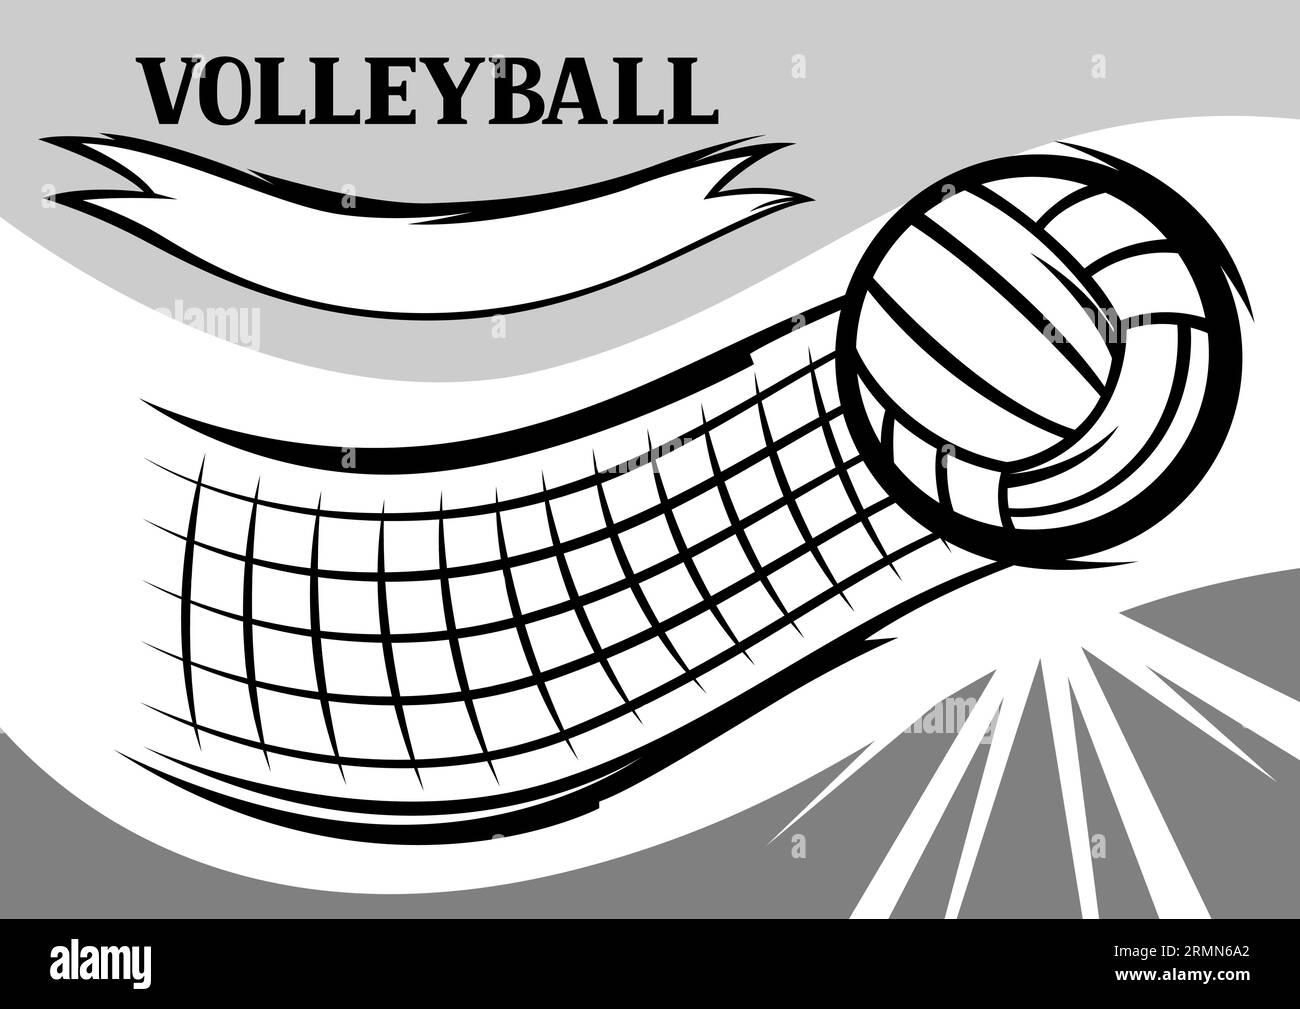 Background with volleyball items. Sport club illustration. Stock Vector